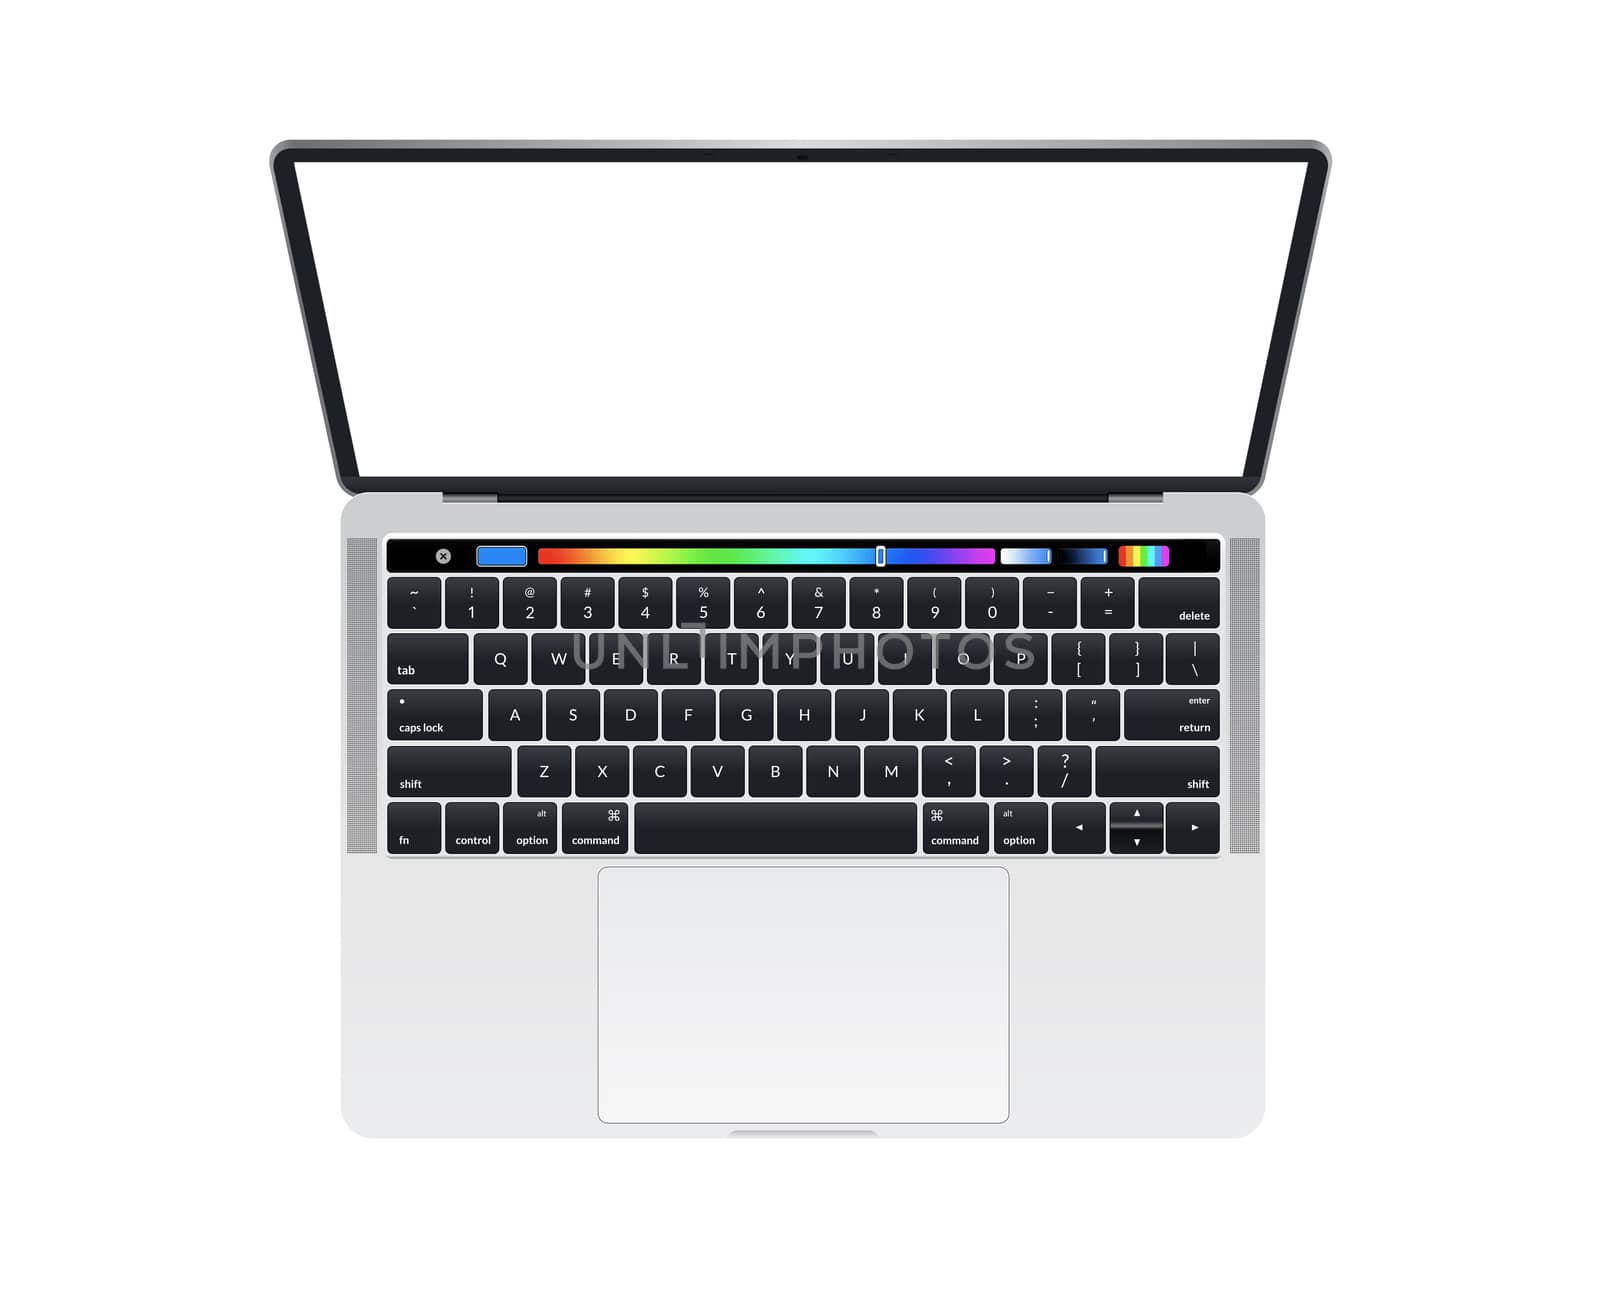 Isolated silver laptop computer with keyboard with touch bar gra by cougarsan